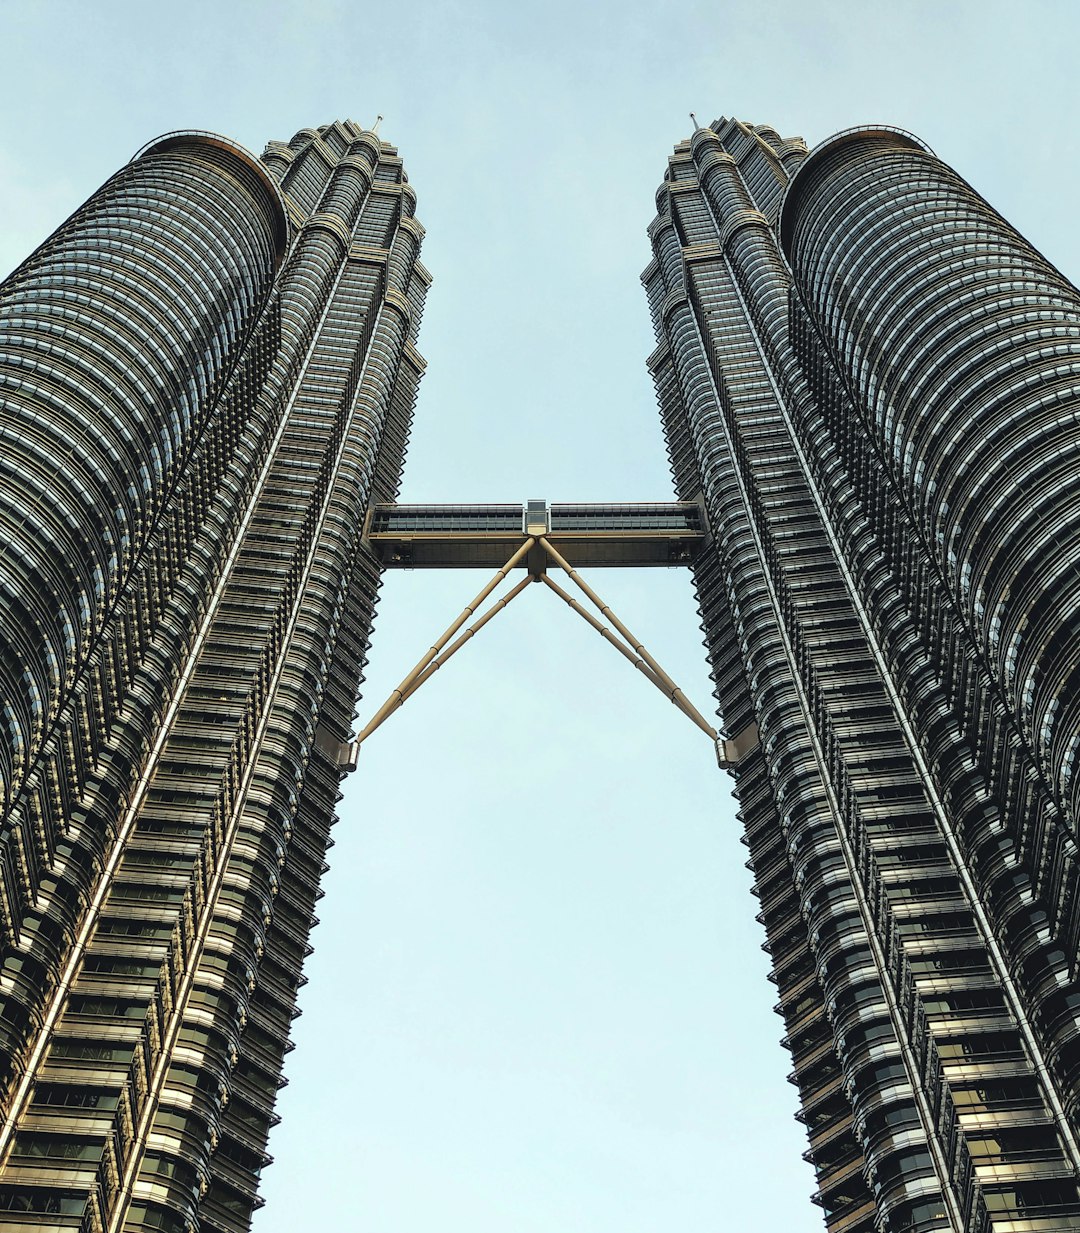 Travel Tips and Stories of Petronas Twin Towers in Malaysia